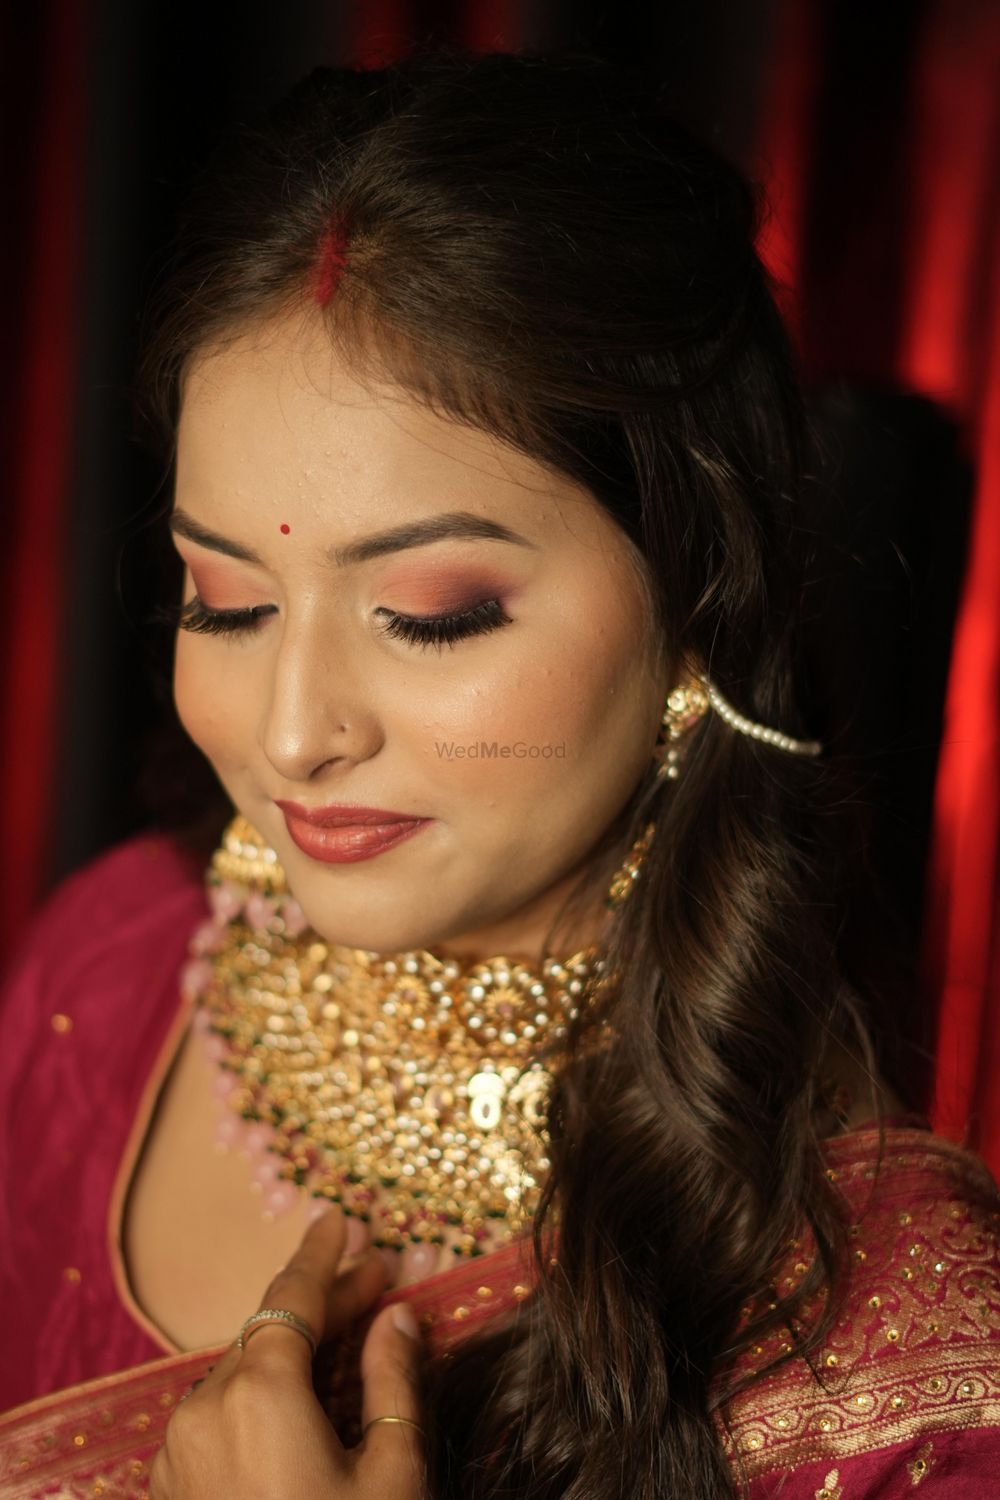 Photo By S M Makeovers - Bridal Makeup